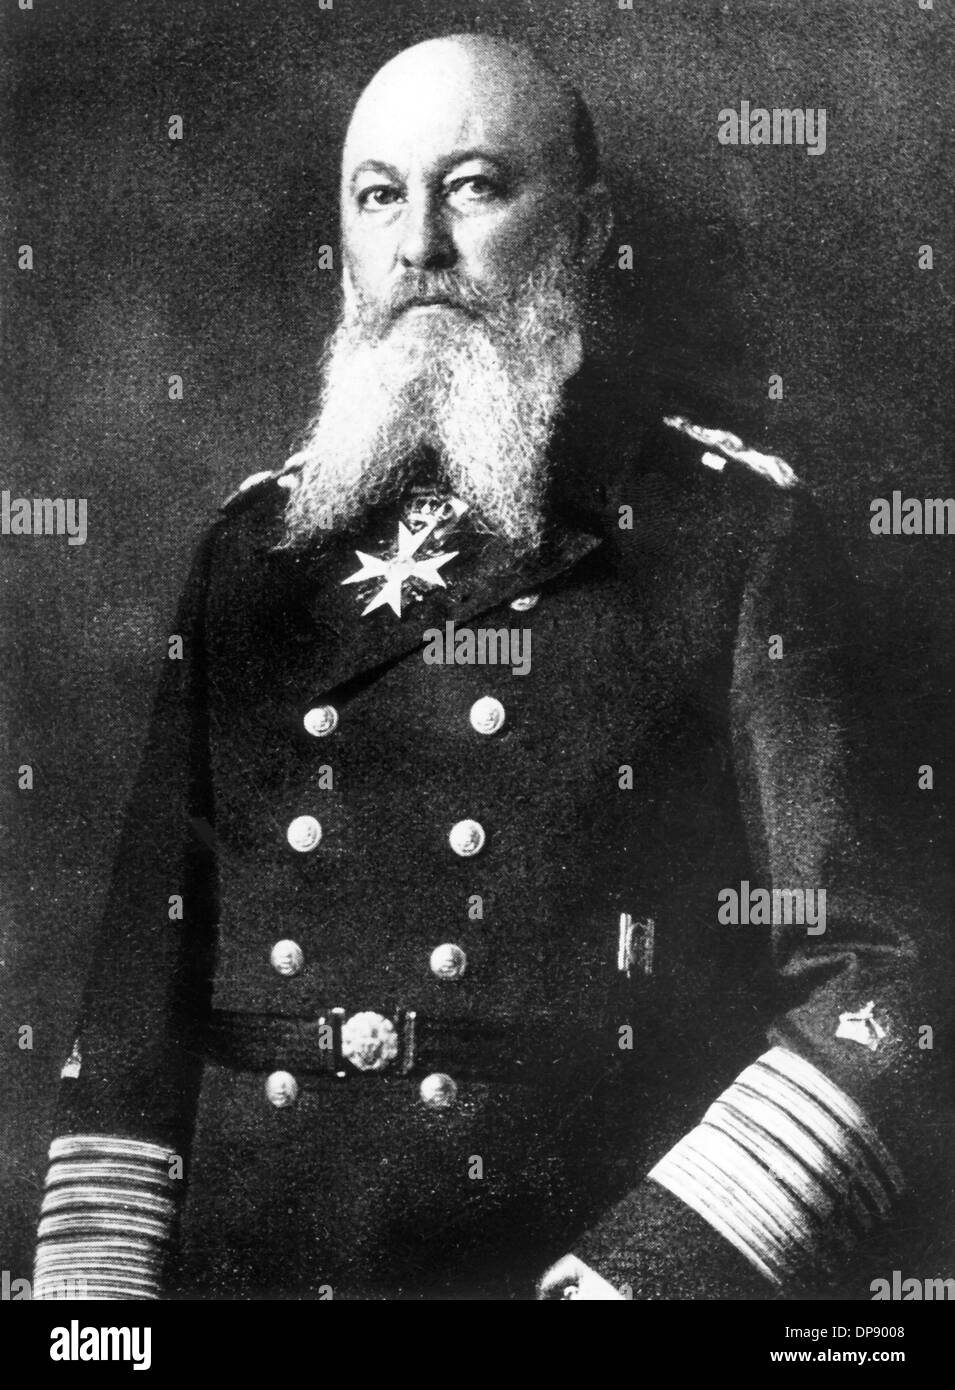 Single picture of the Grand Admiral Alfred von Tirpitz. He was considered as the founder of the German deep sea fleet and was promoted from supreme commander of the marine to the fleed admiral. The 'Tirpitz-Plan', which was named after him, planned the development of the second largest European sea fleet and lead to the arms race with Great Britain during the First World War. (Undated library photo) Stock Photo